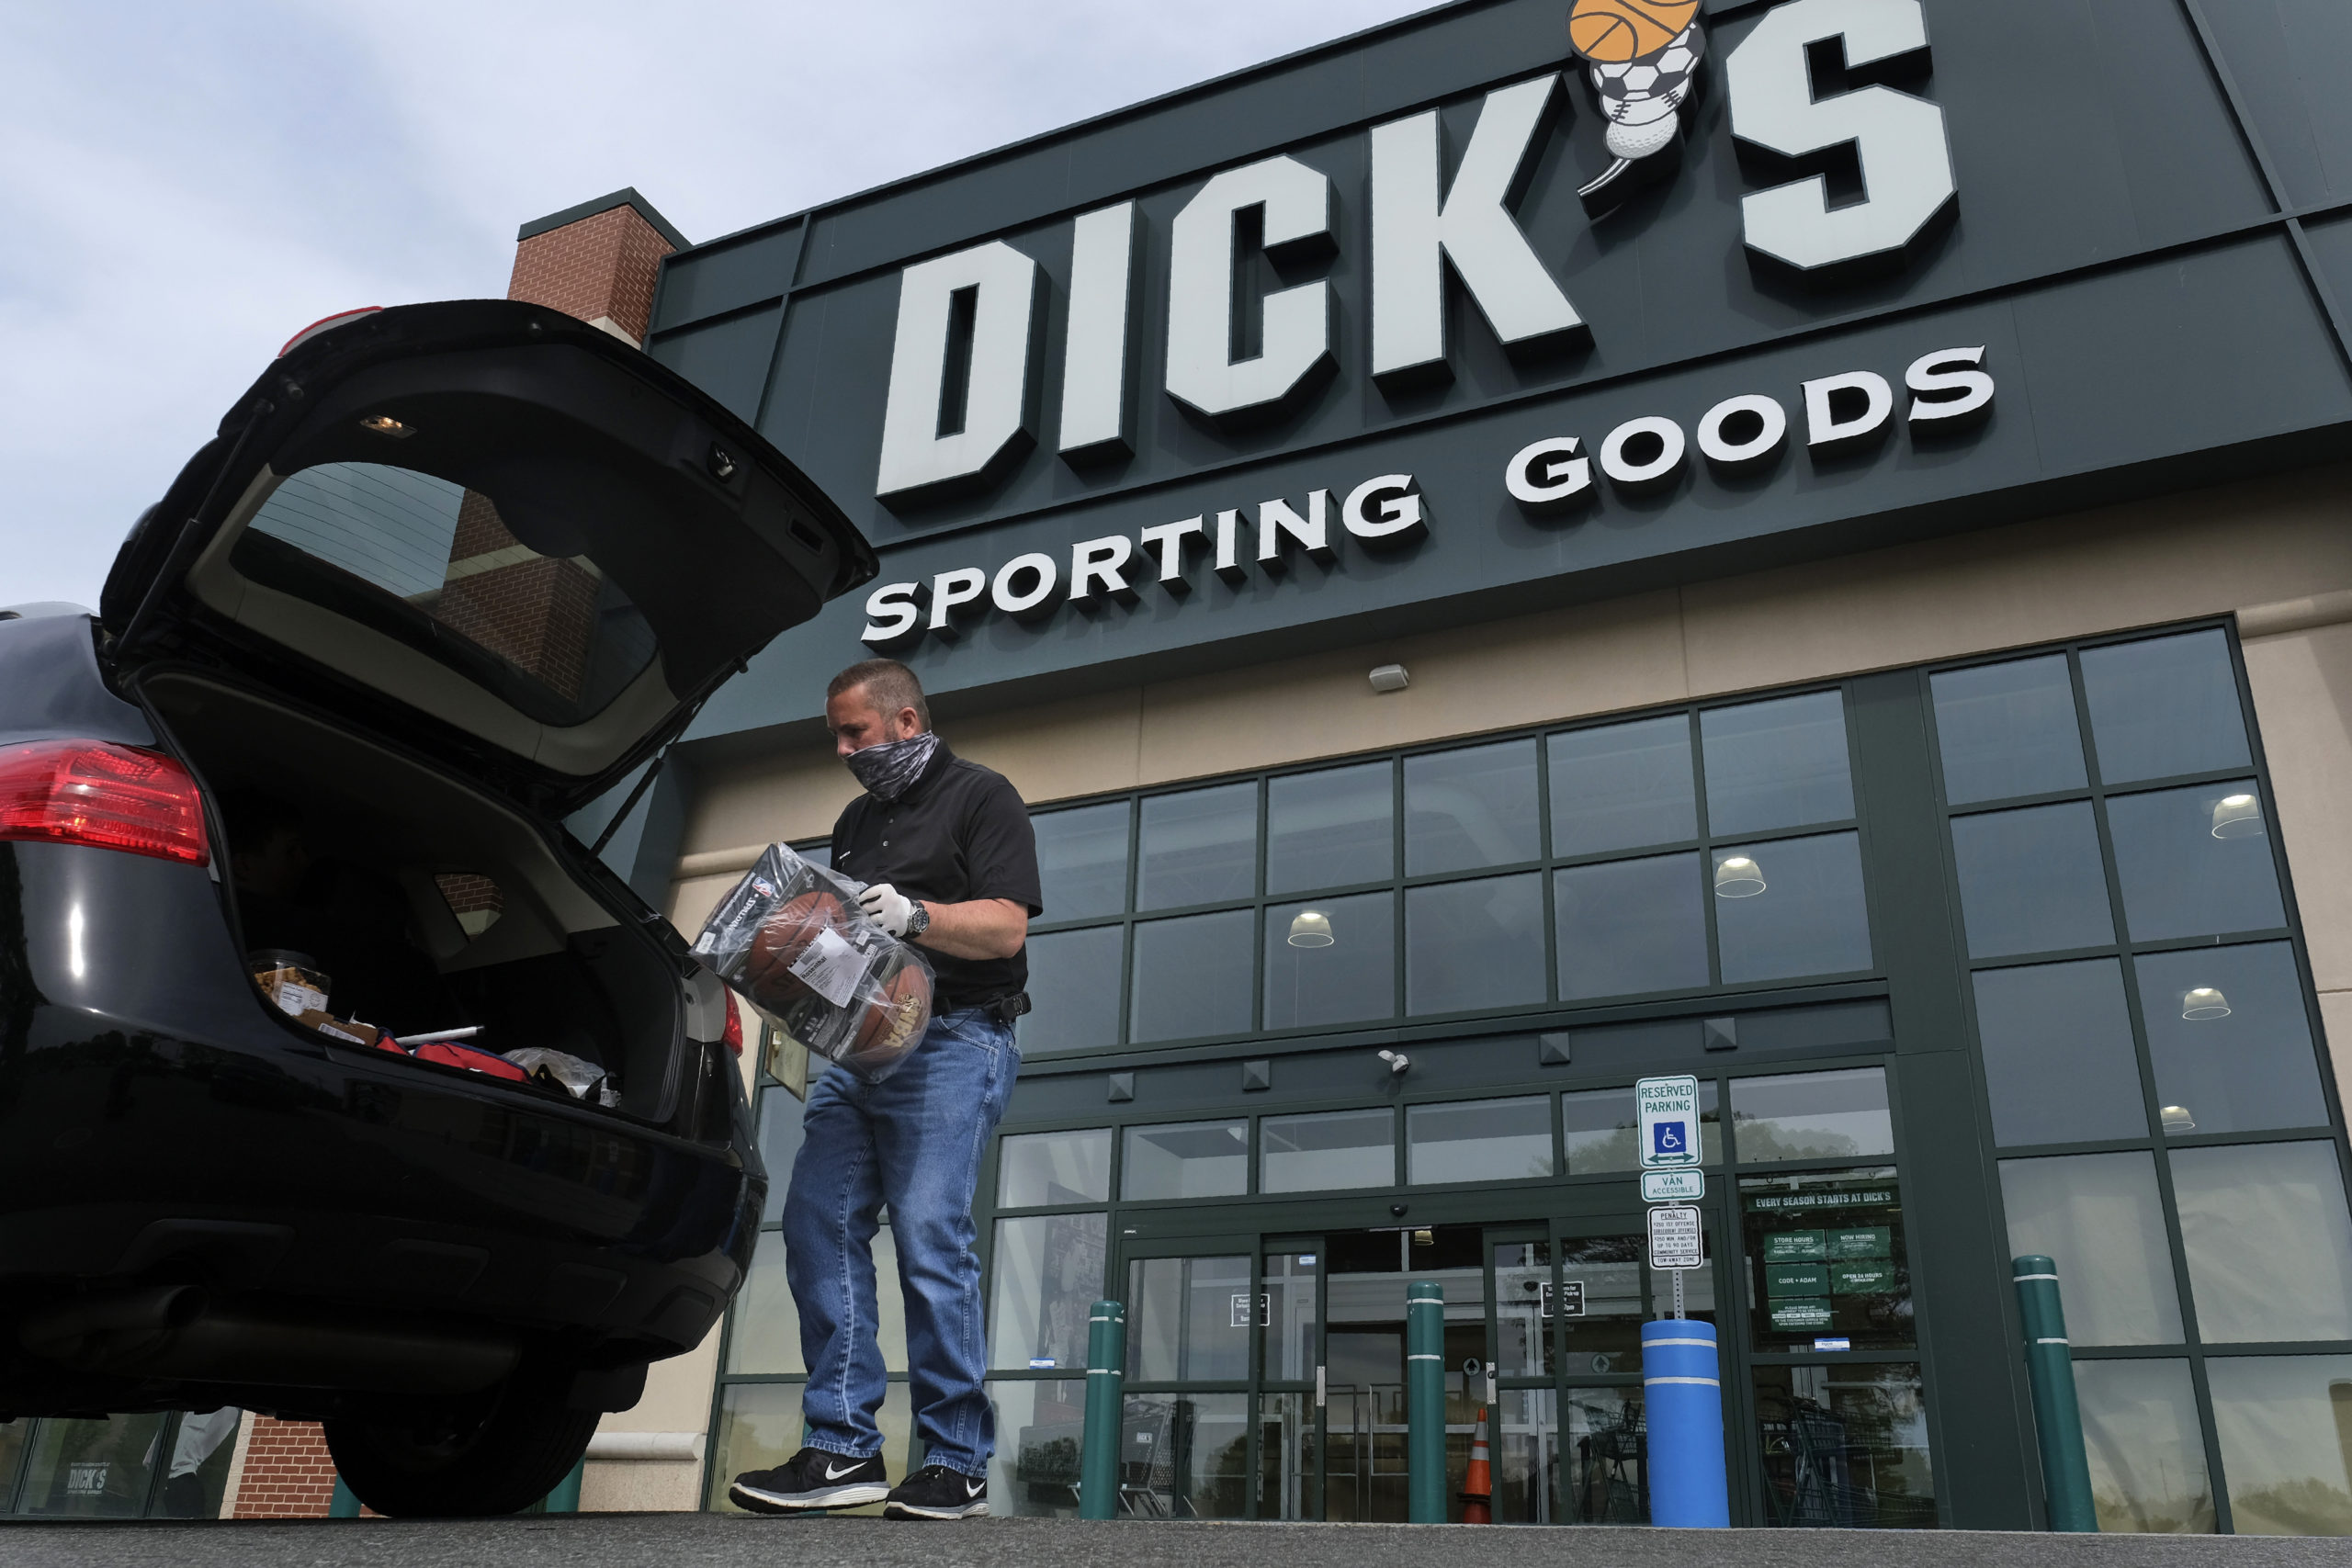 Gus Promollo puts an order in a customer’s trunk at Dick’s Sporting Goods in Paramus, New Jersey on May 18, 2020. Dick’s Sporting Goods profit slipped in its second quarter and missed Wall Street’s expectations as the retailer cut its full-year profit outlook, citing worries over theft at its stores.